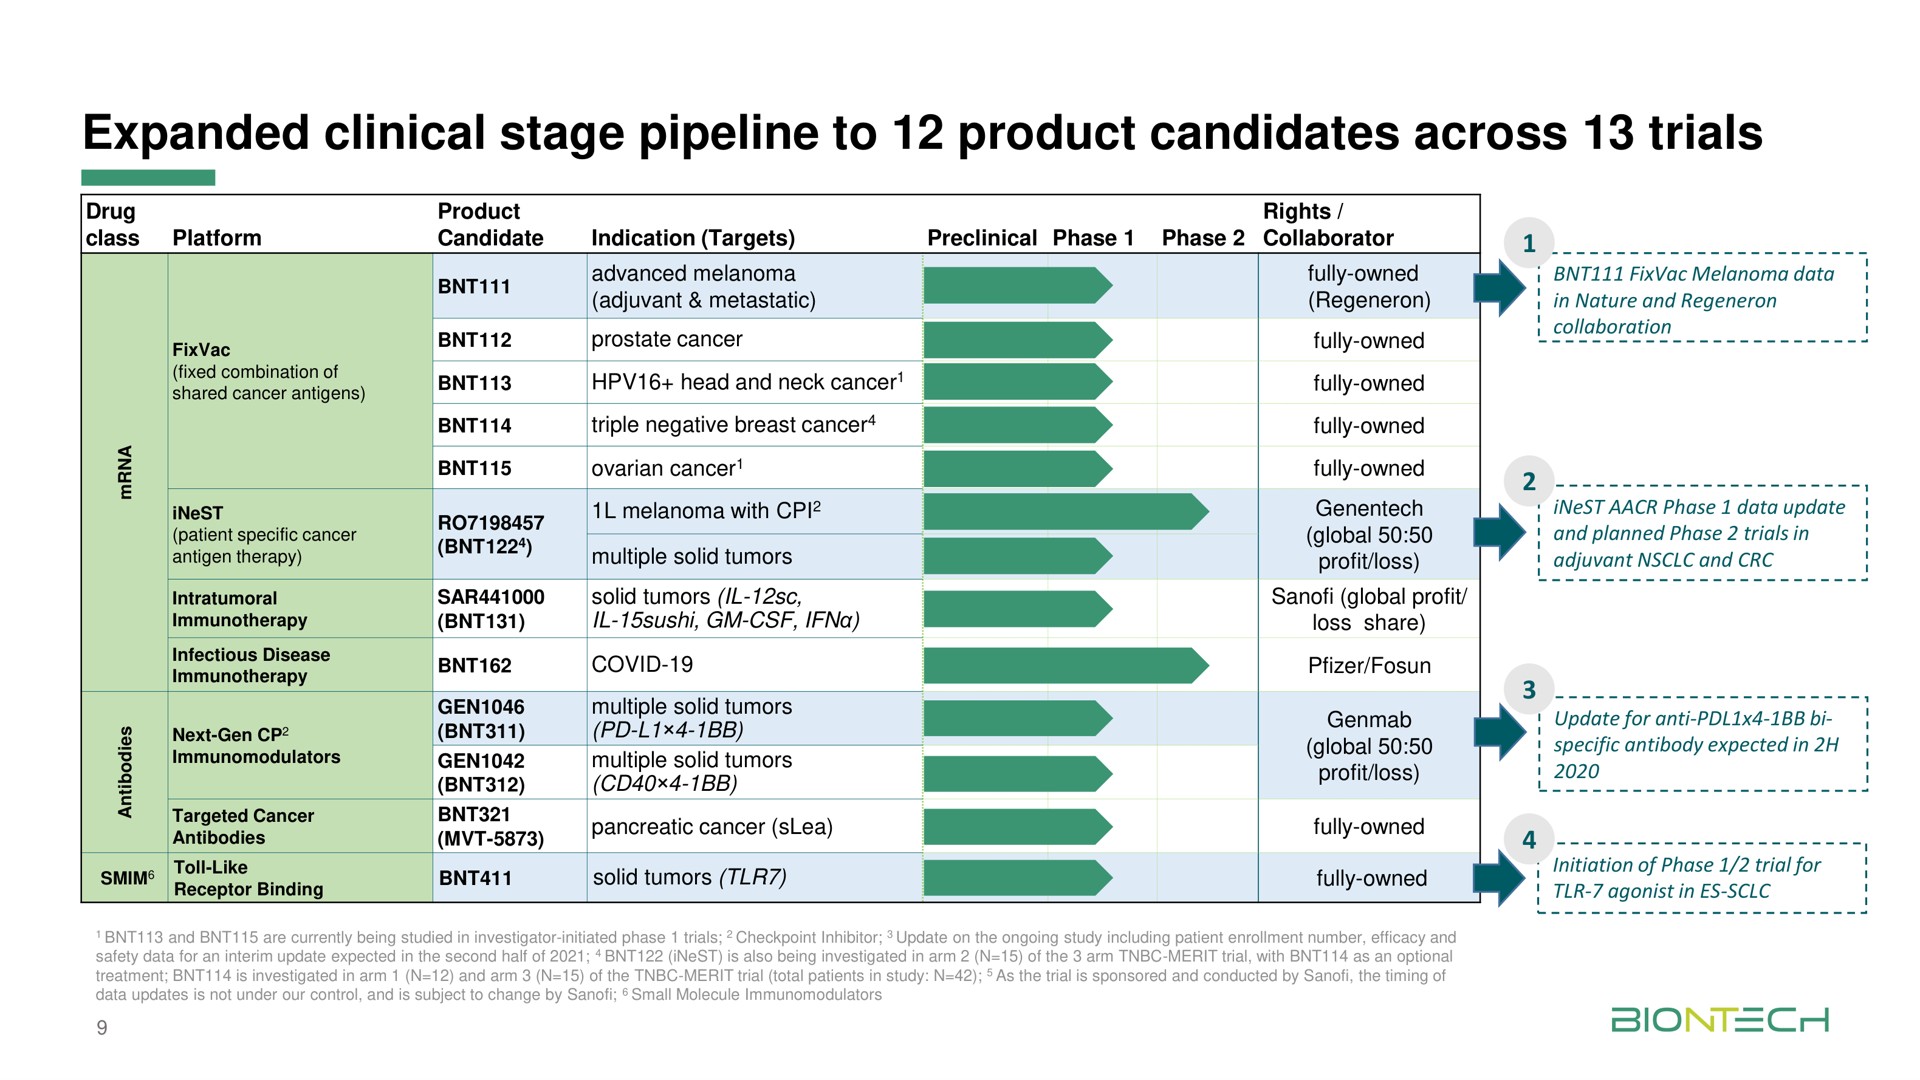 expanded clinical stage pipeline to product candidates across trials | BioNTech